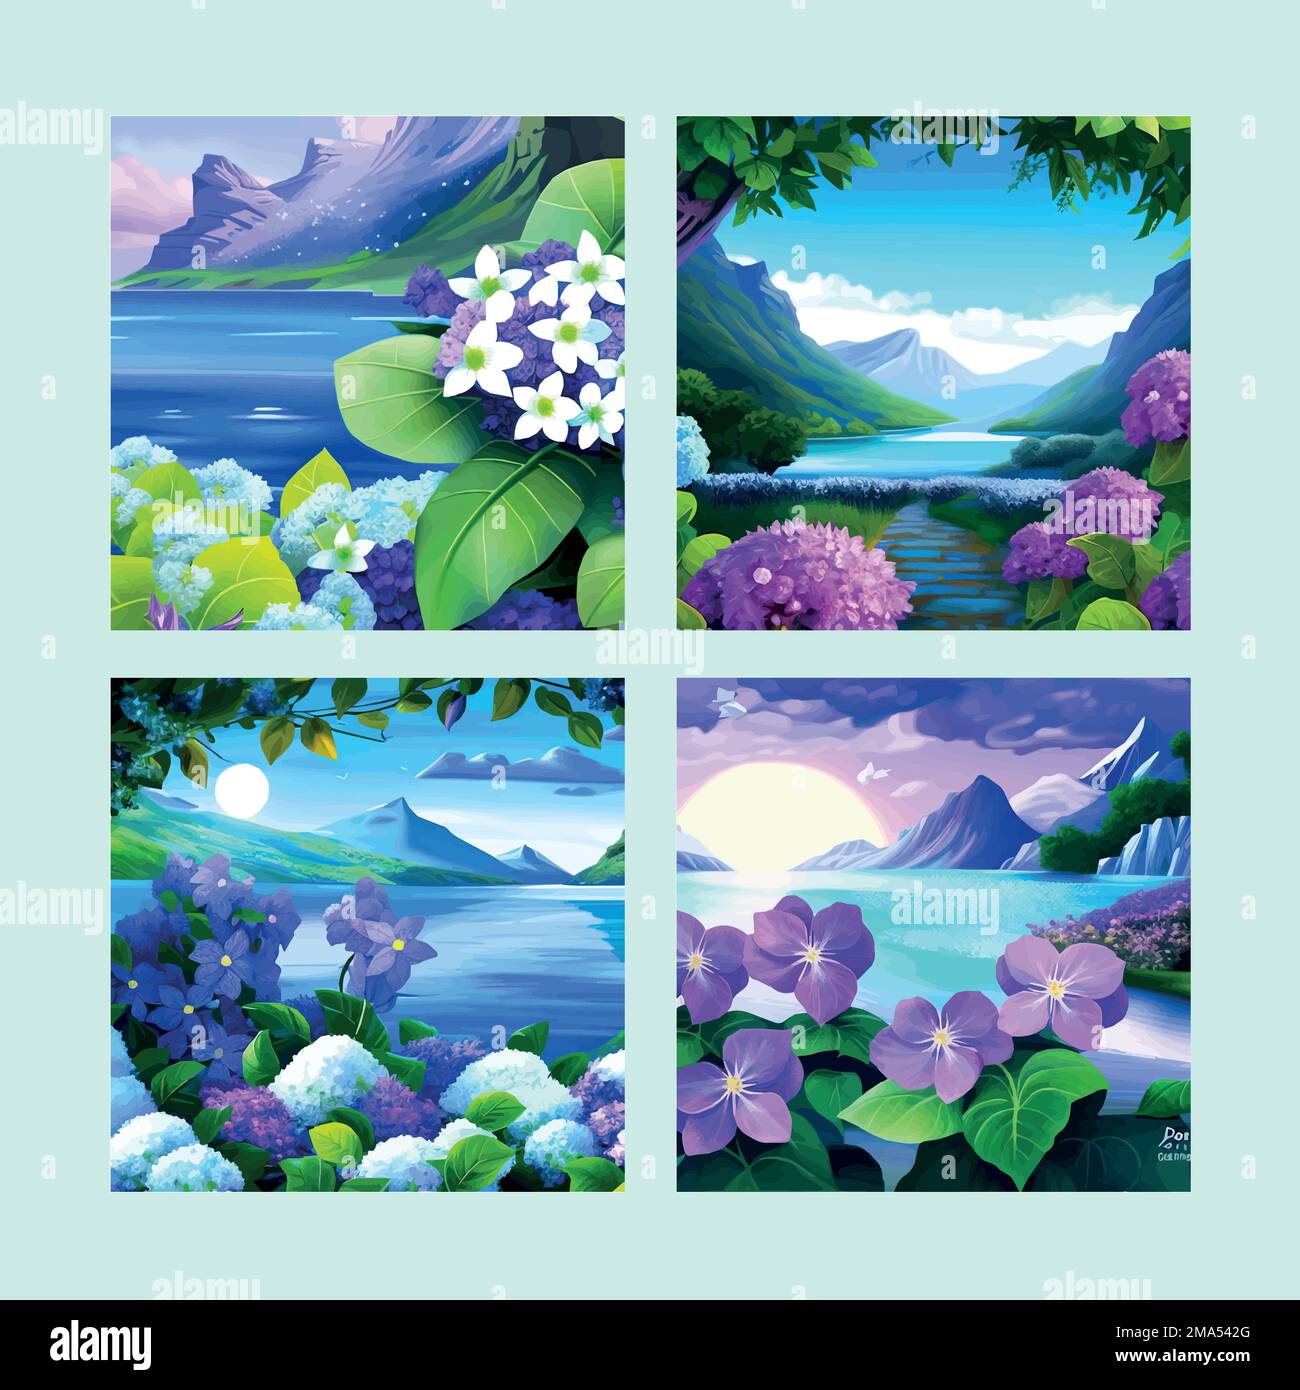 Mountain Spring Landscape Mountains With Snowy Peaks Lilac Flower